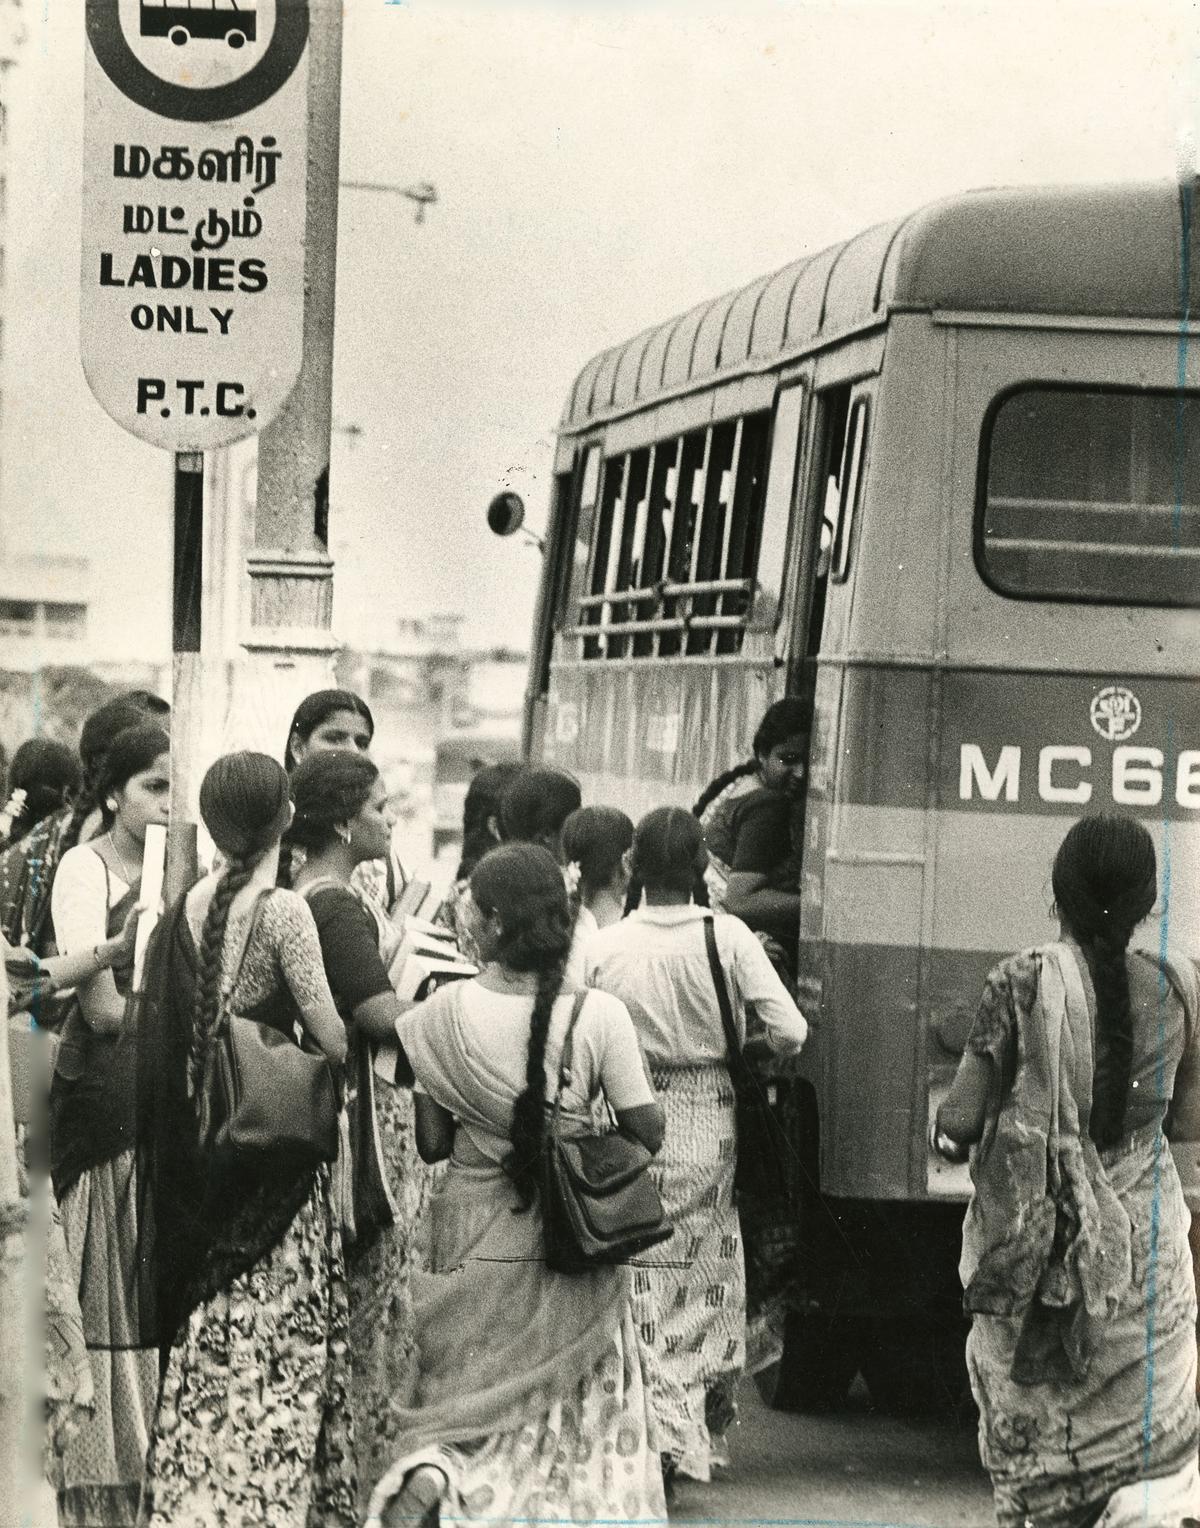 Ladies standing in a bus stop only for them, in Madras on July 07, 1981